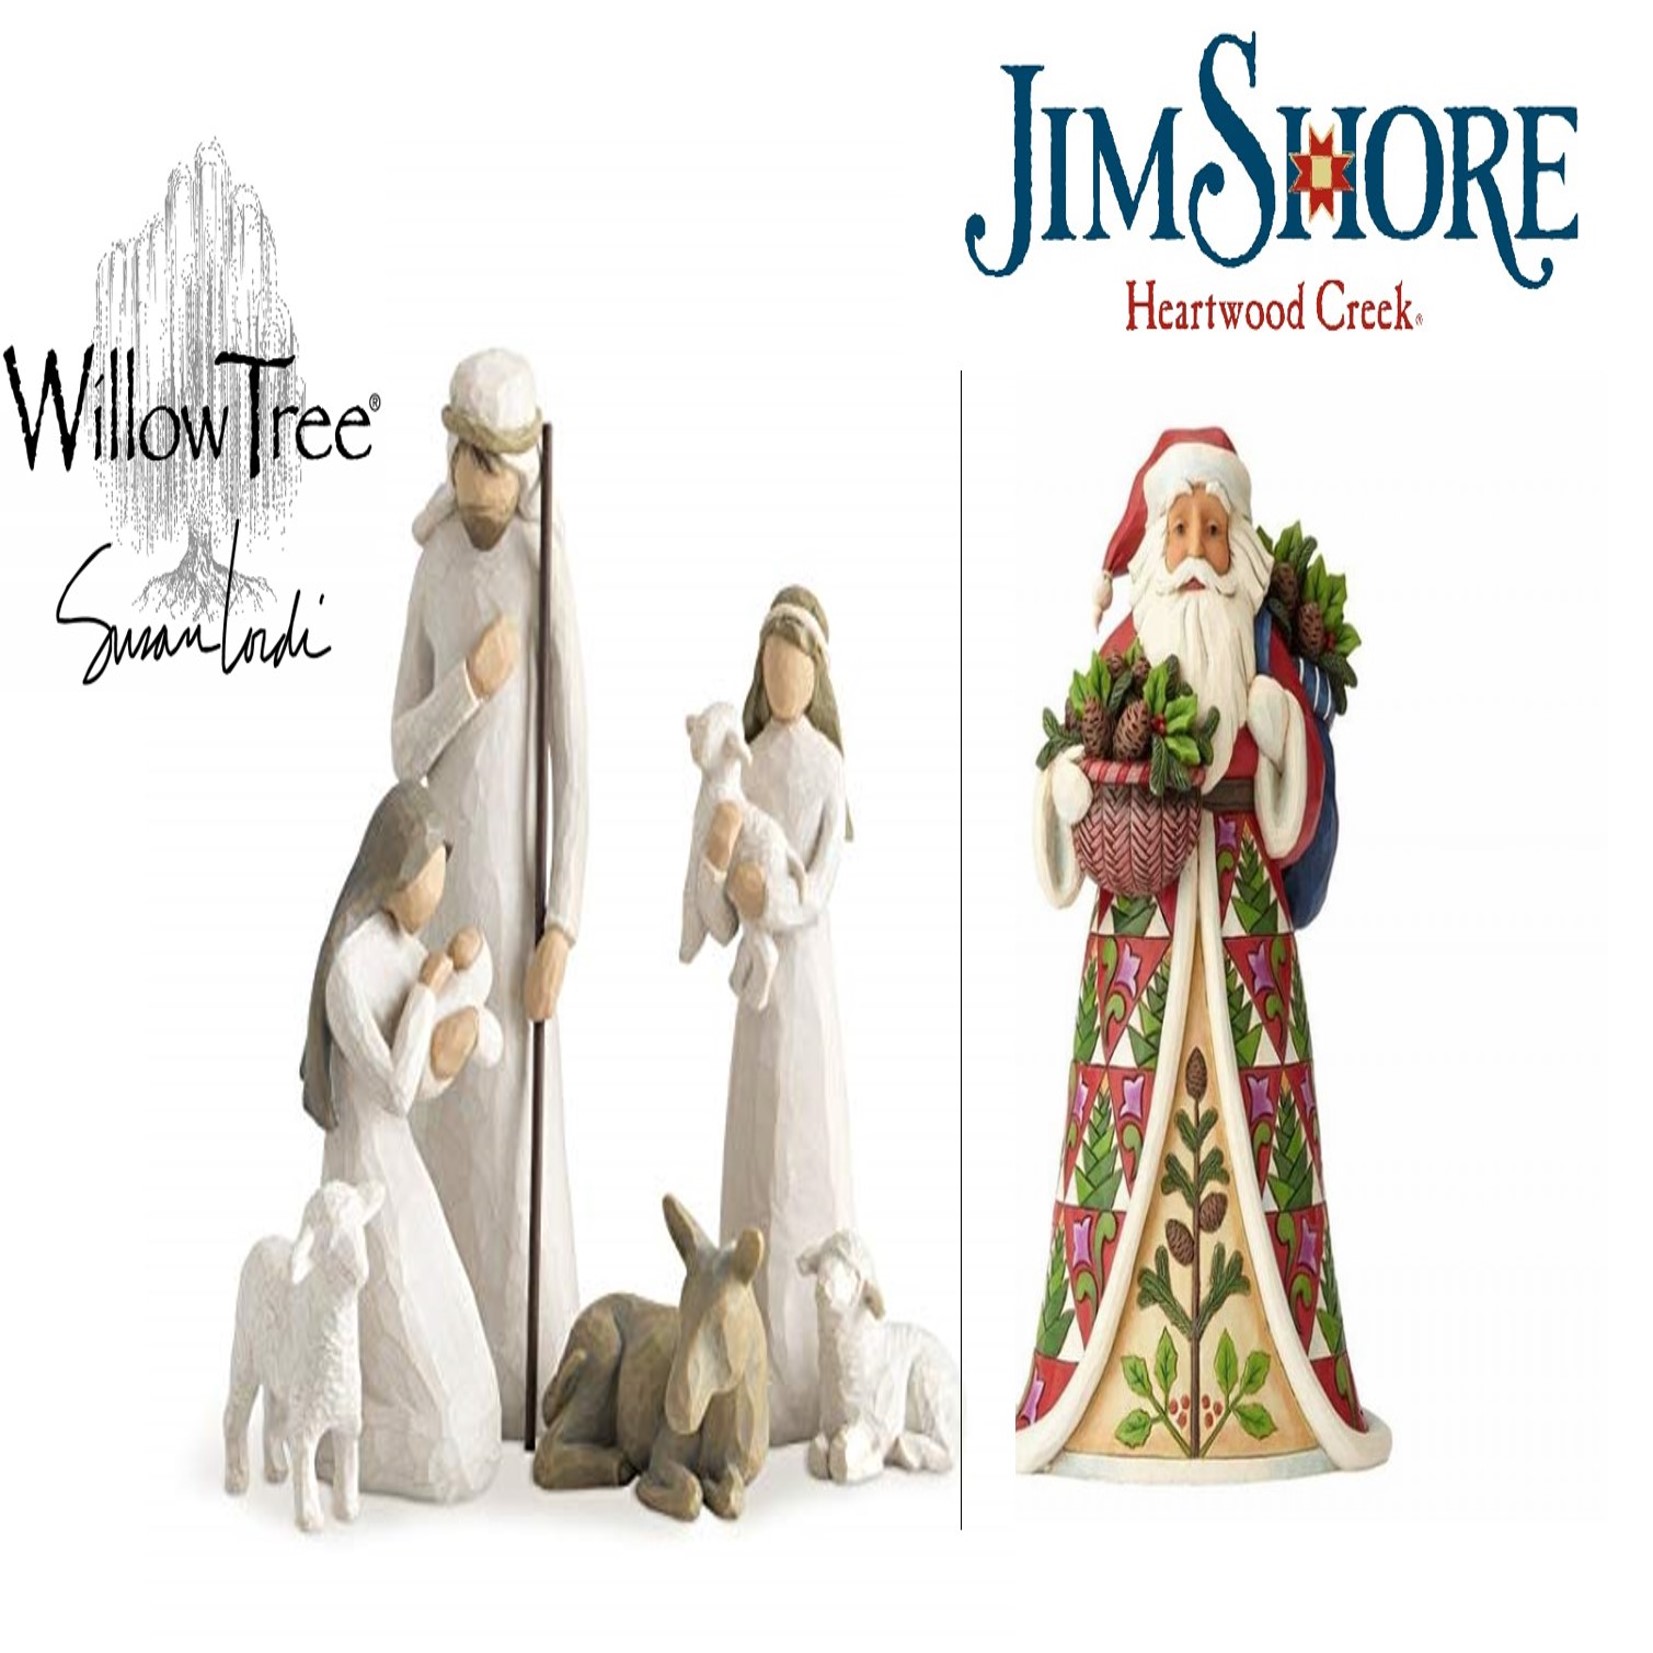 The story behind Willow Tree and Jim Shore